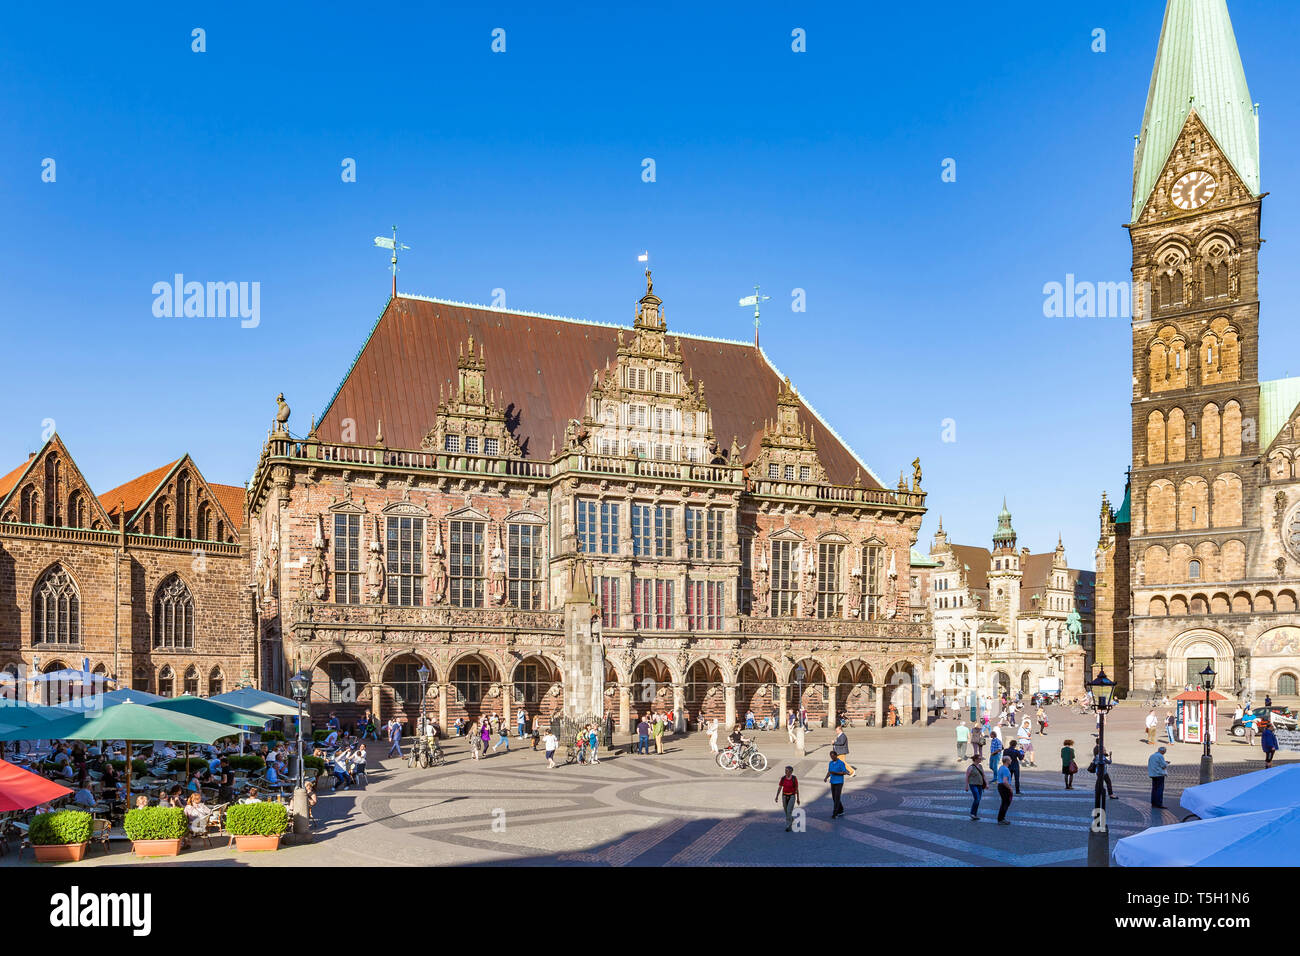 Germany, Free Hanseatic City of Bremen, market square, cafe, Bremen Roland, townhall Stock Photo